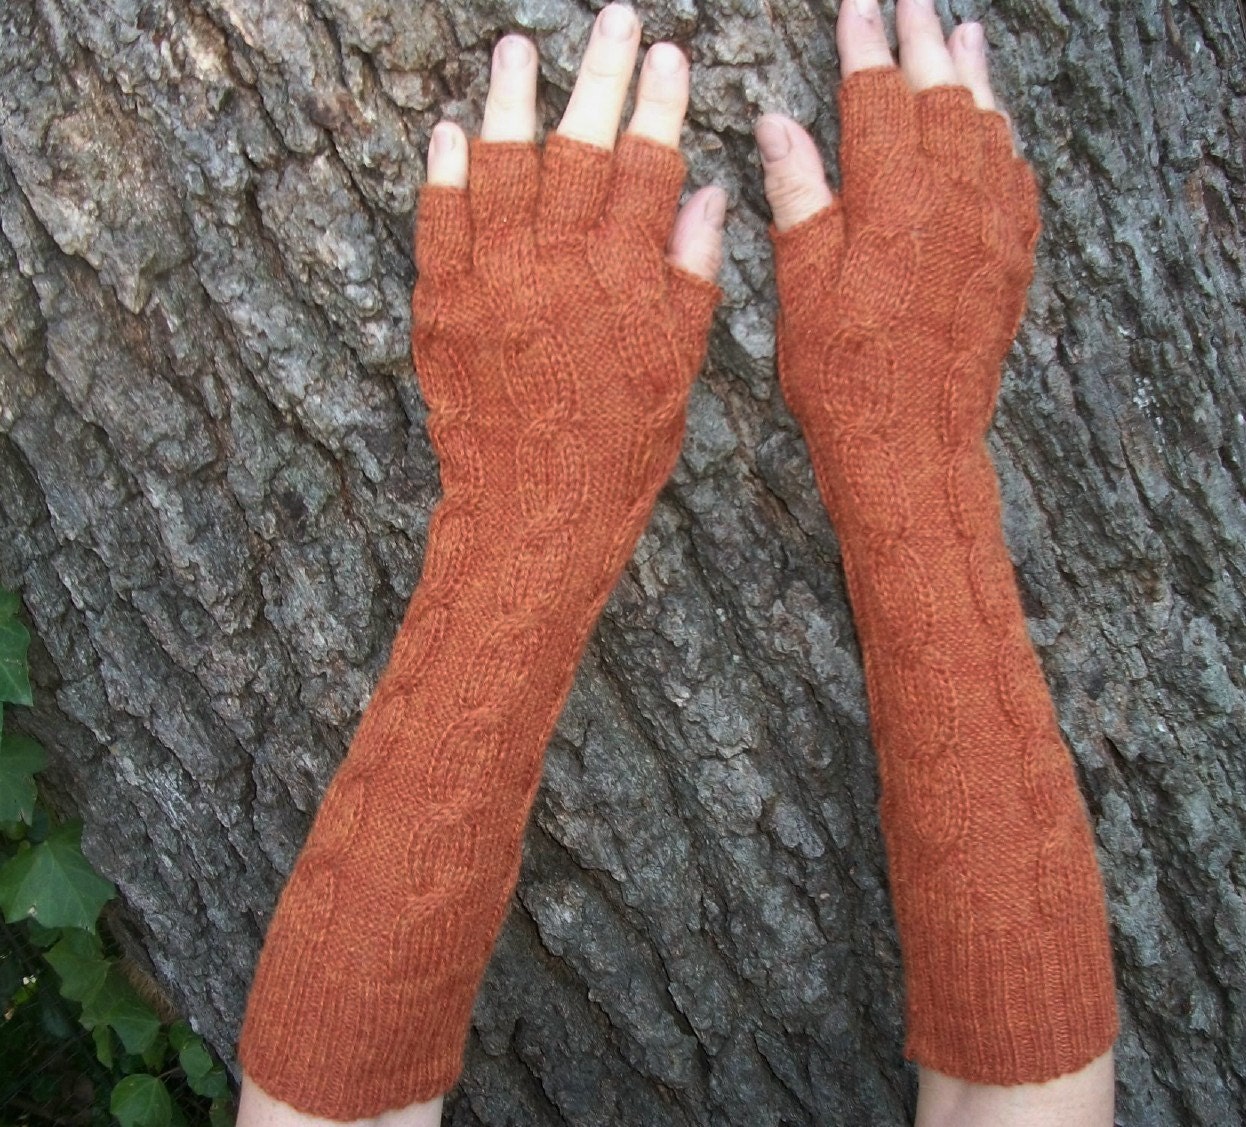 Alpaca Blend Finger-Less Knitted Arm Warmers With Cable. 7 Colors . Burgundy, Mustard, Skyblue, Pumpkin, Camel Tan, Purple, Ginger